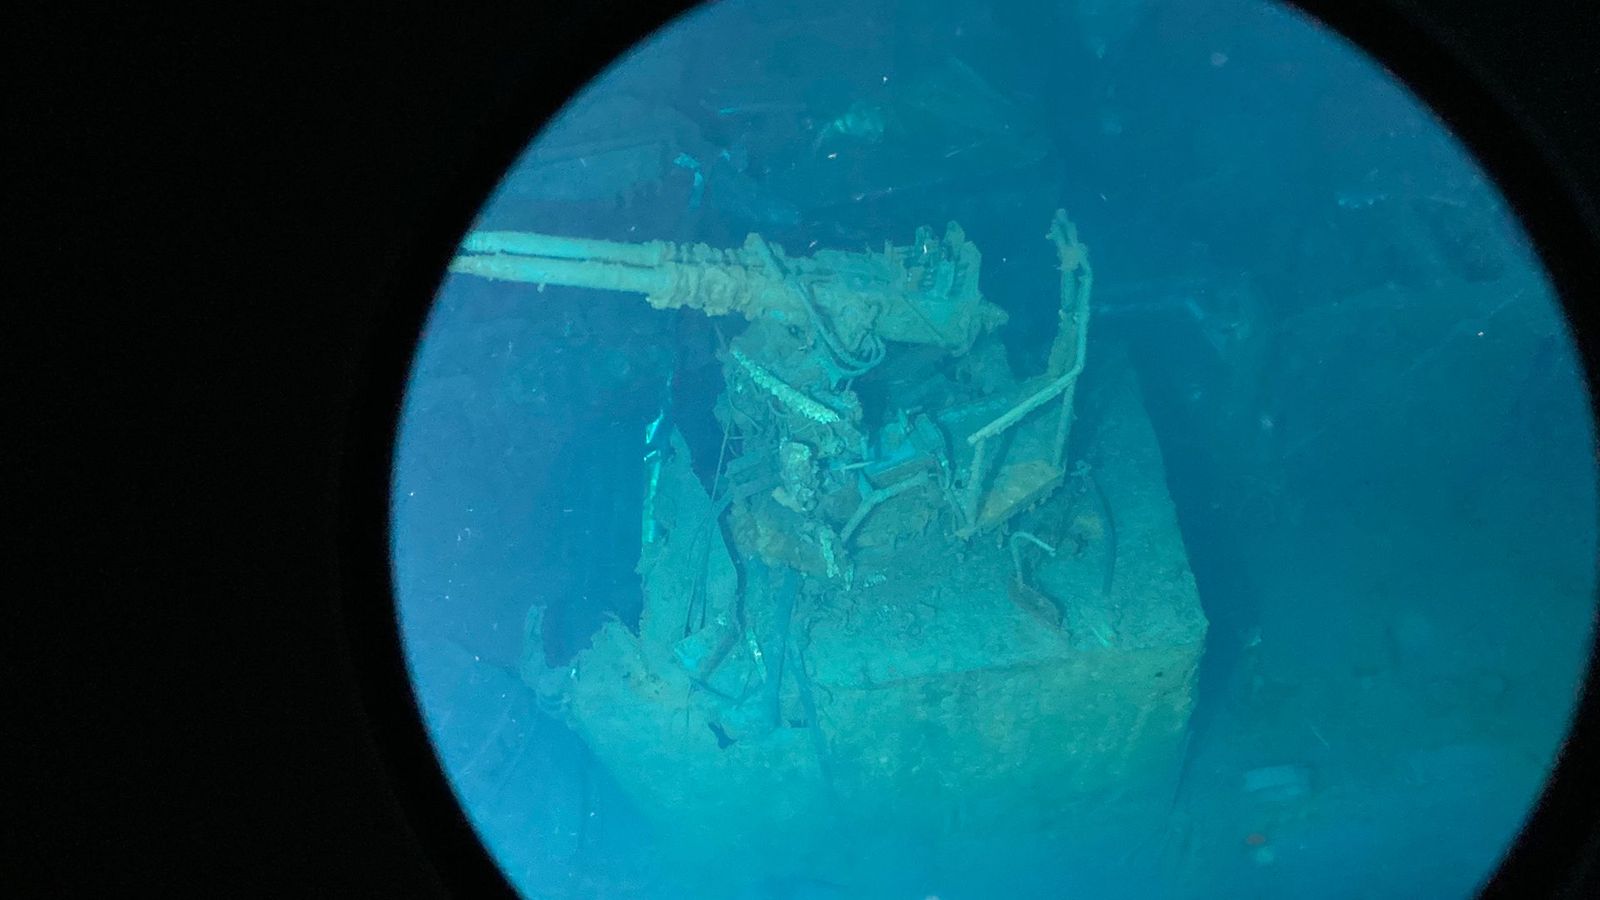 Despite the depth, many of the USS Johnston’s guns appeared to be relatively intact after 75 years in the deep (Credit: Caladan Oceanic)